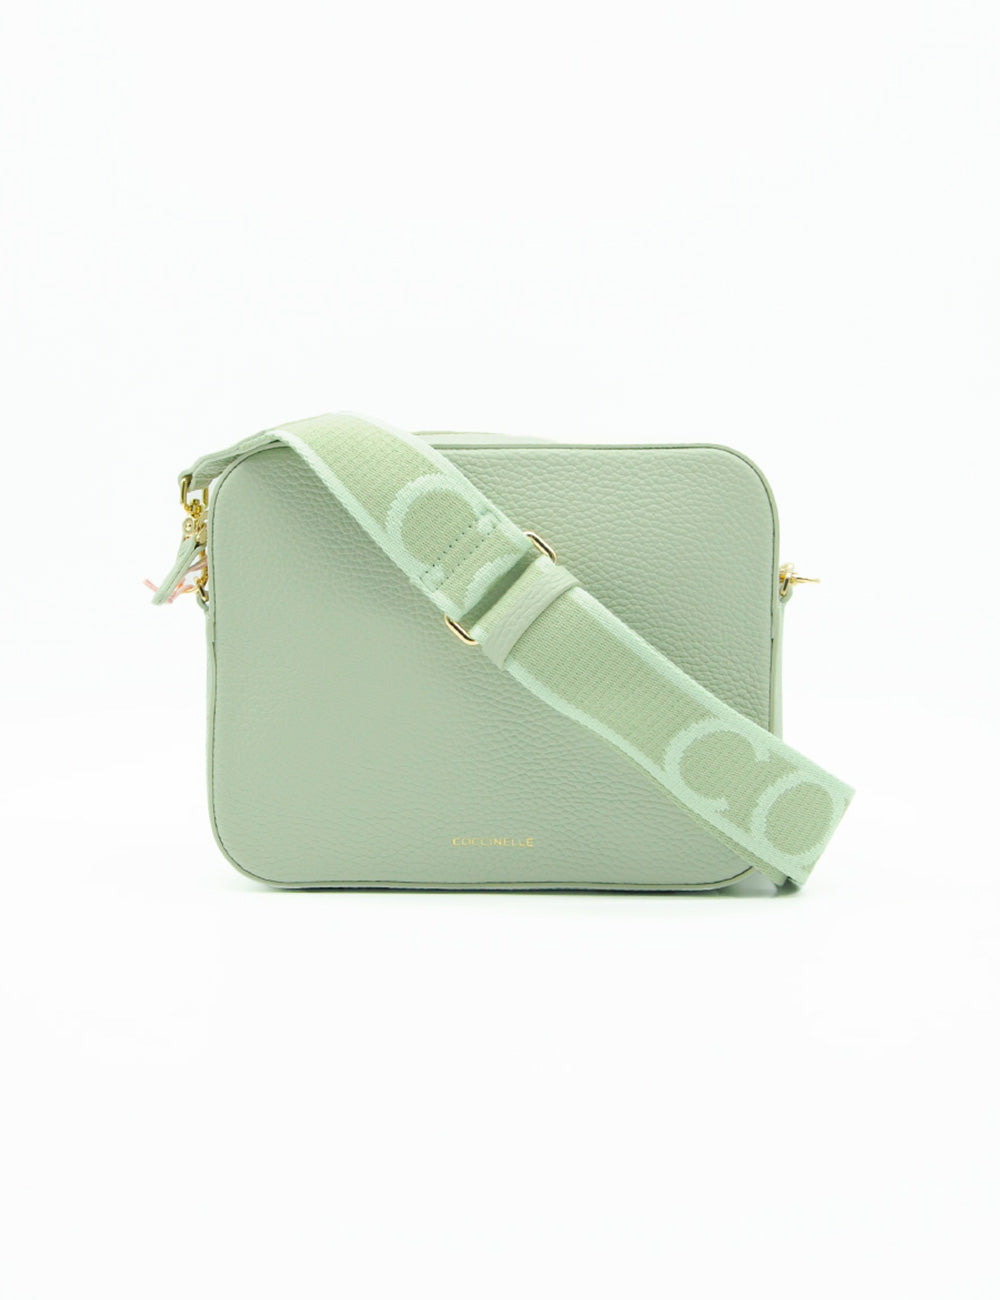 Coccinelle Tebe Large Celadon Green